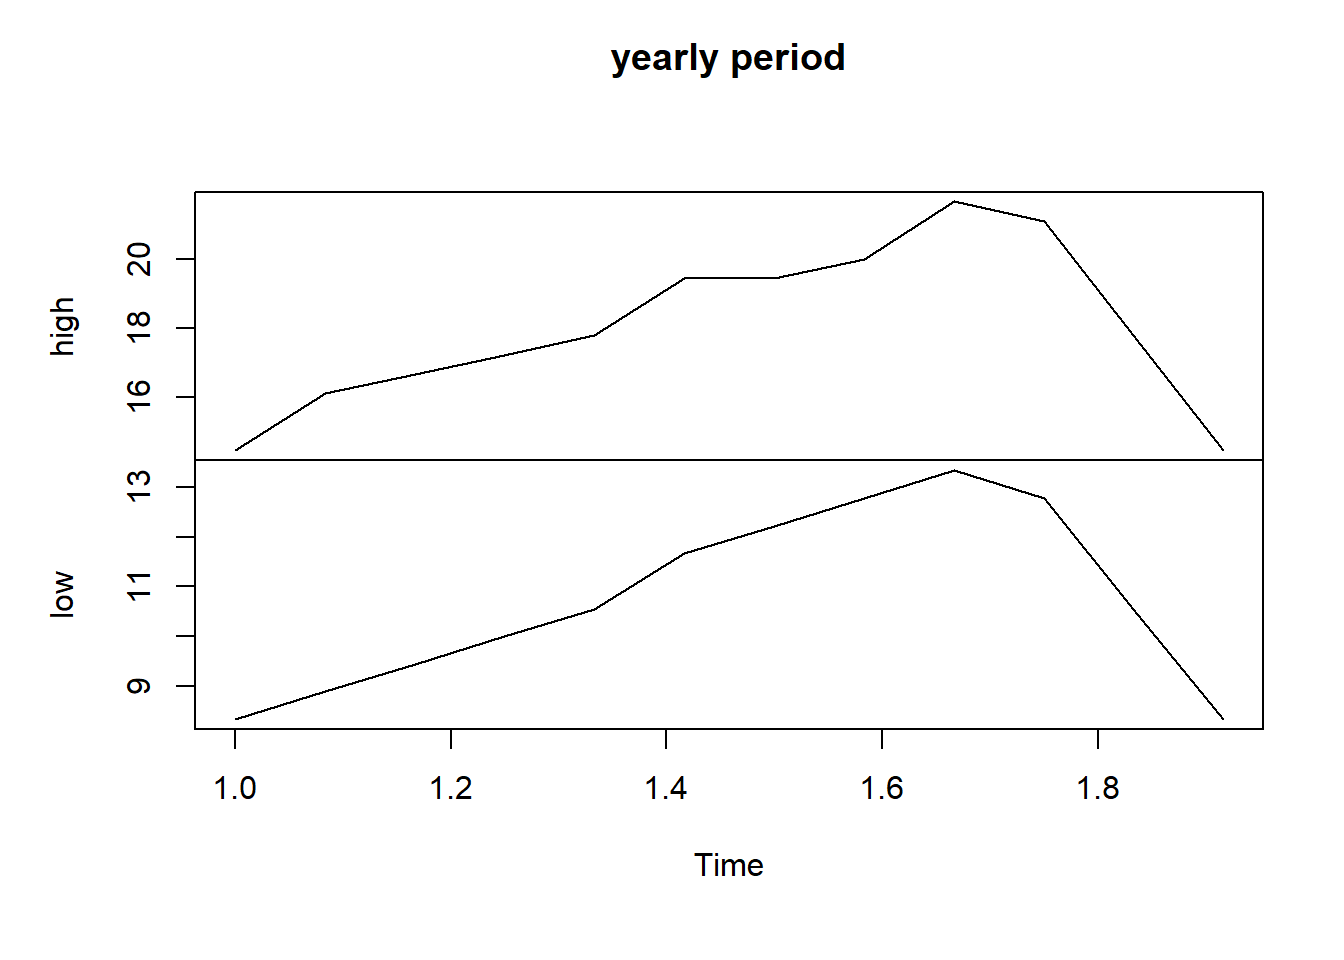 SF data with yearly time unit